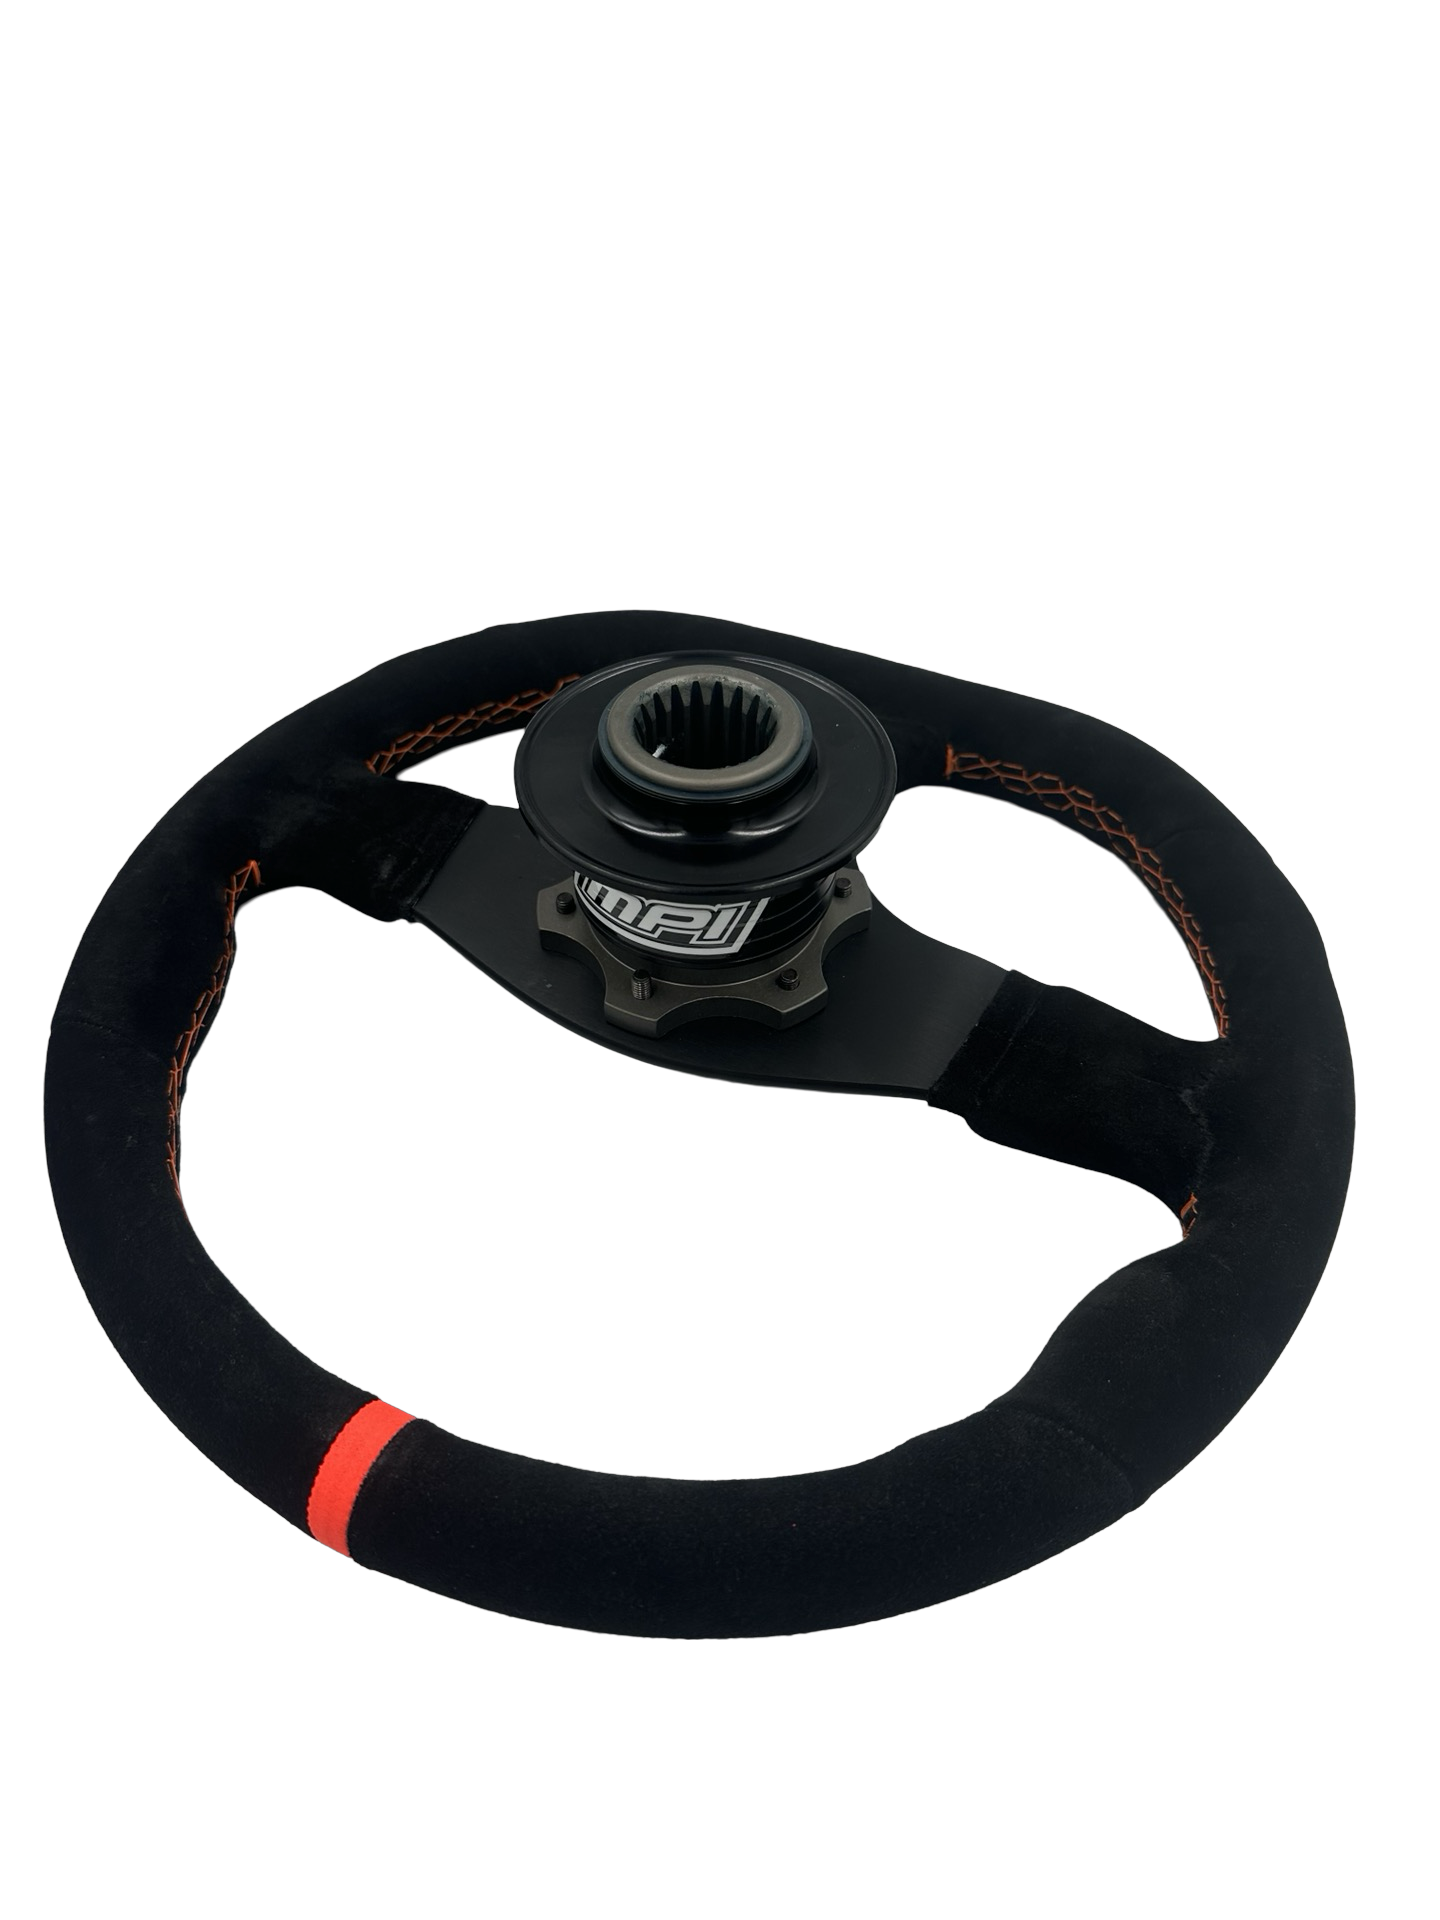 Can-Am / Polaris MPI Steering Wheel + Quick Release Setup